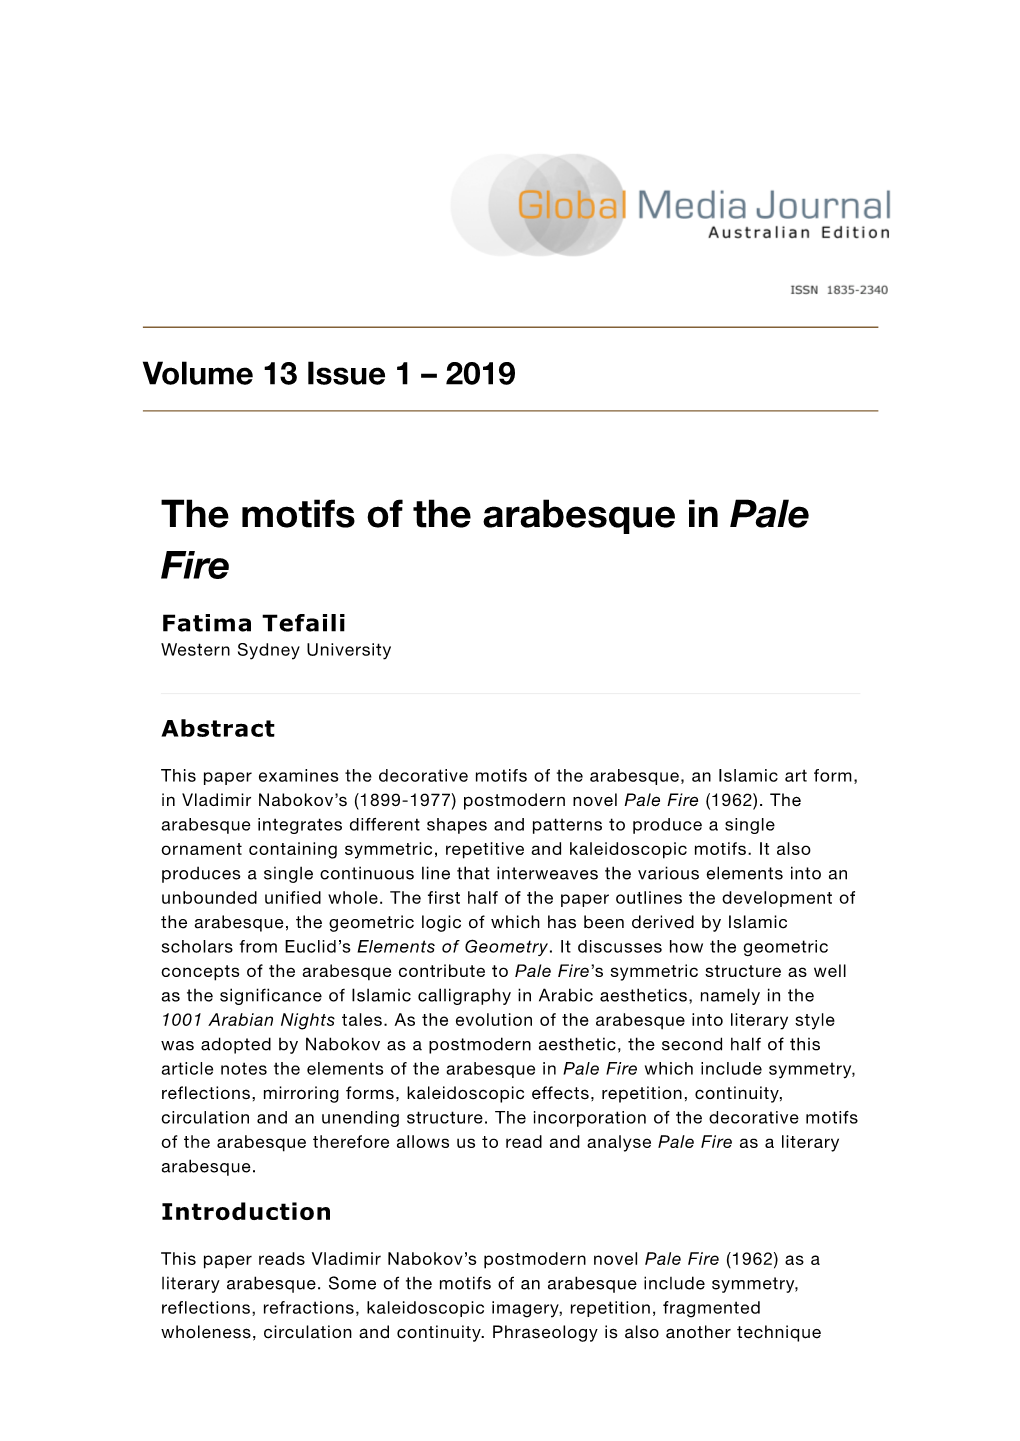 The Motifs of the Arabesque in Pale Fire